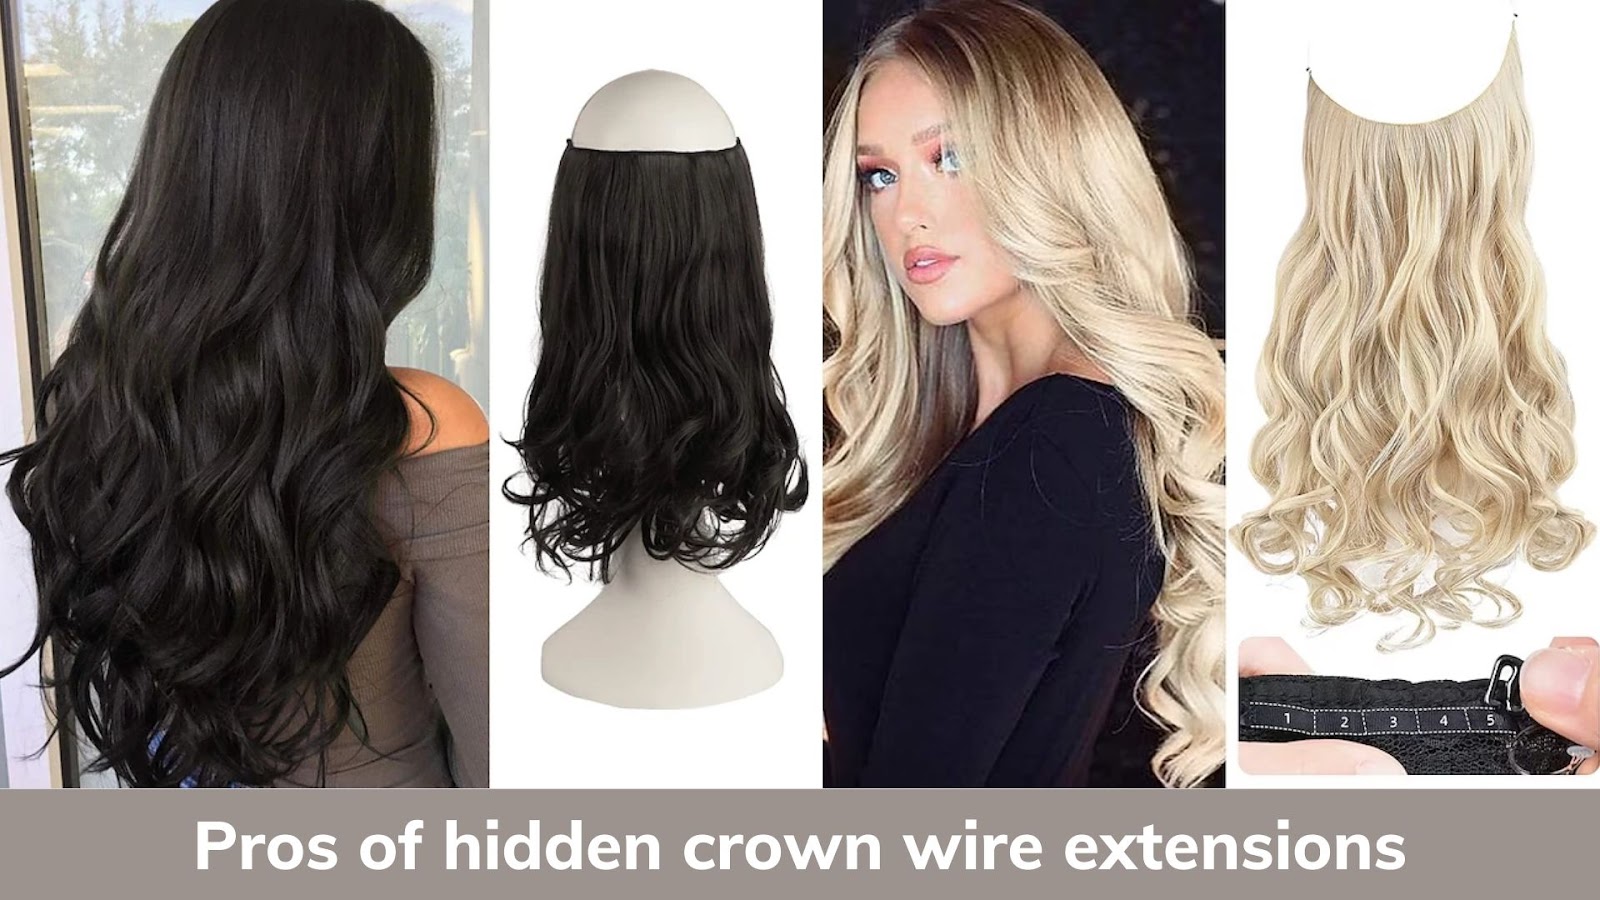 Pros of hidden crown wire extensions